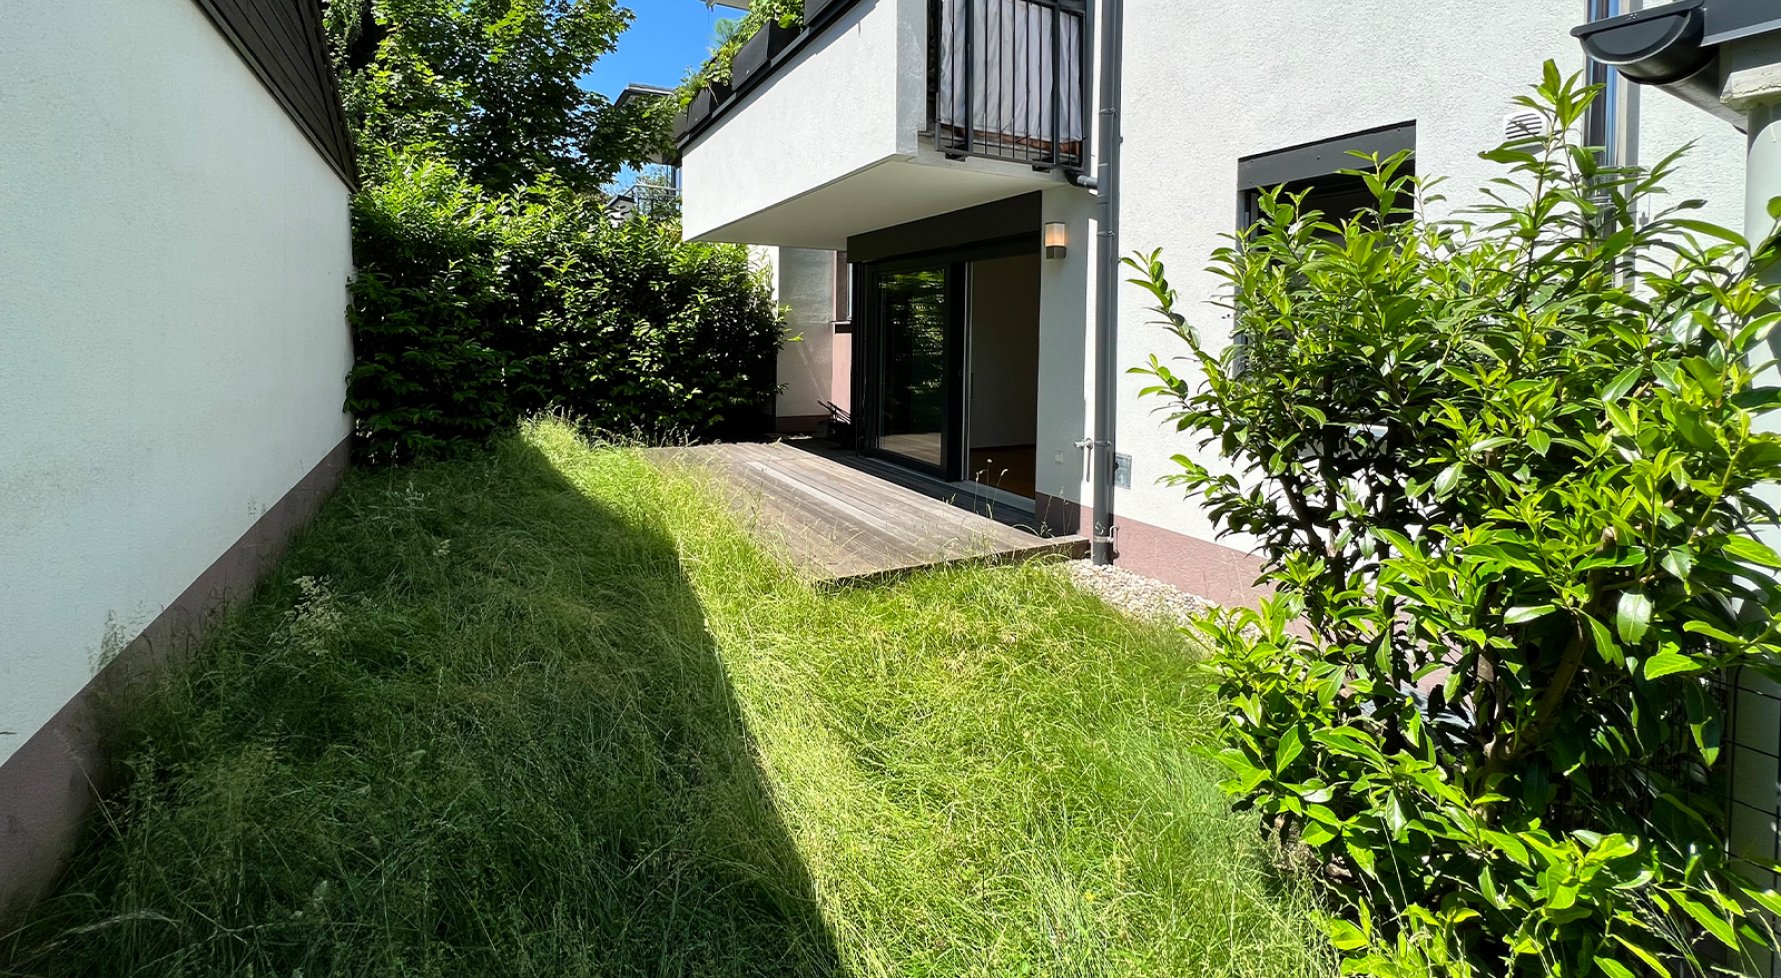 Property in 5020 Salzburg - Josefiau: Capital investment! - Wonderfully located 2-bedroom garden apartment in Joseflau - picture 1